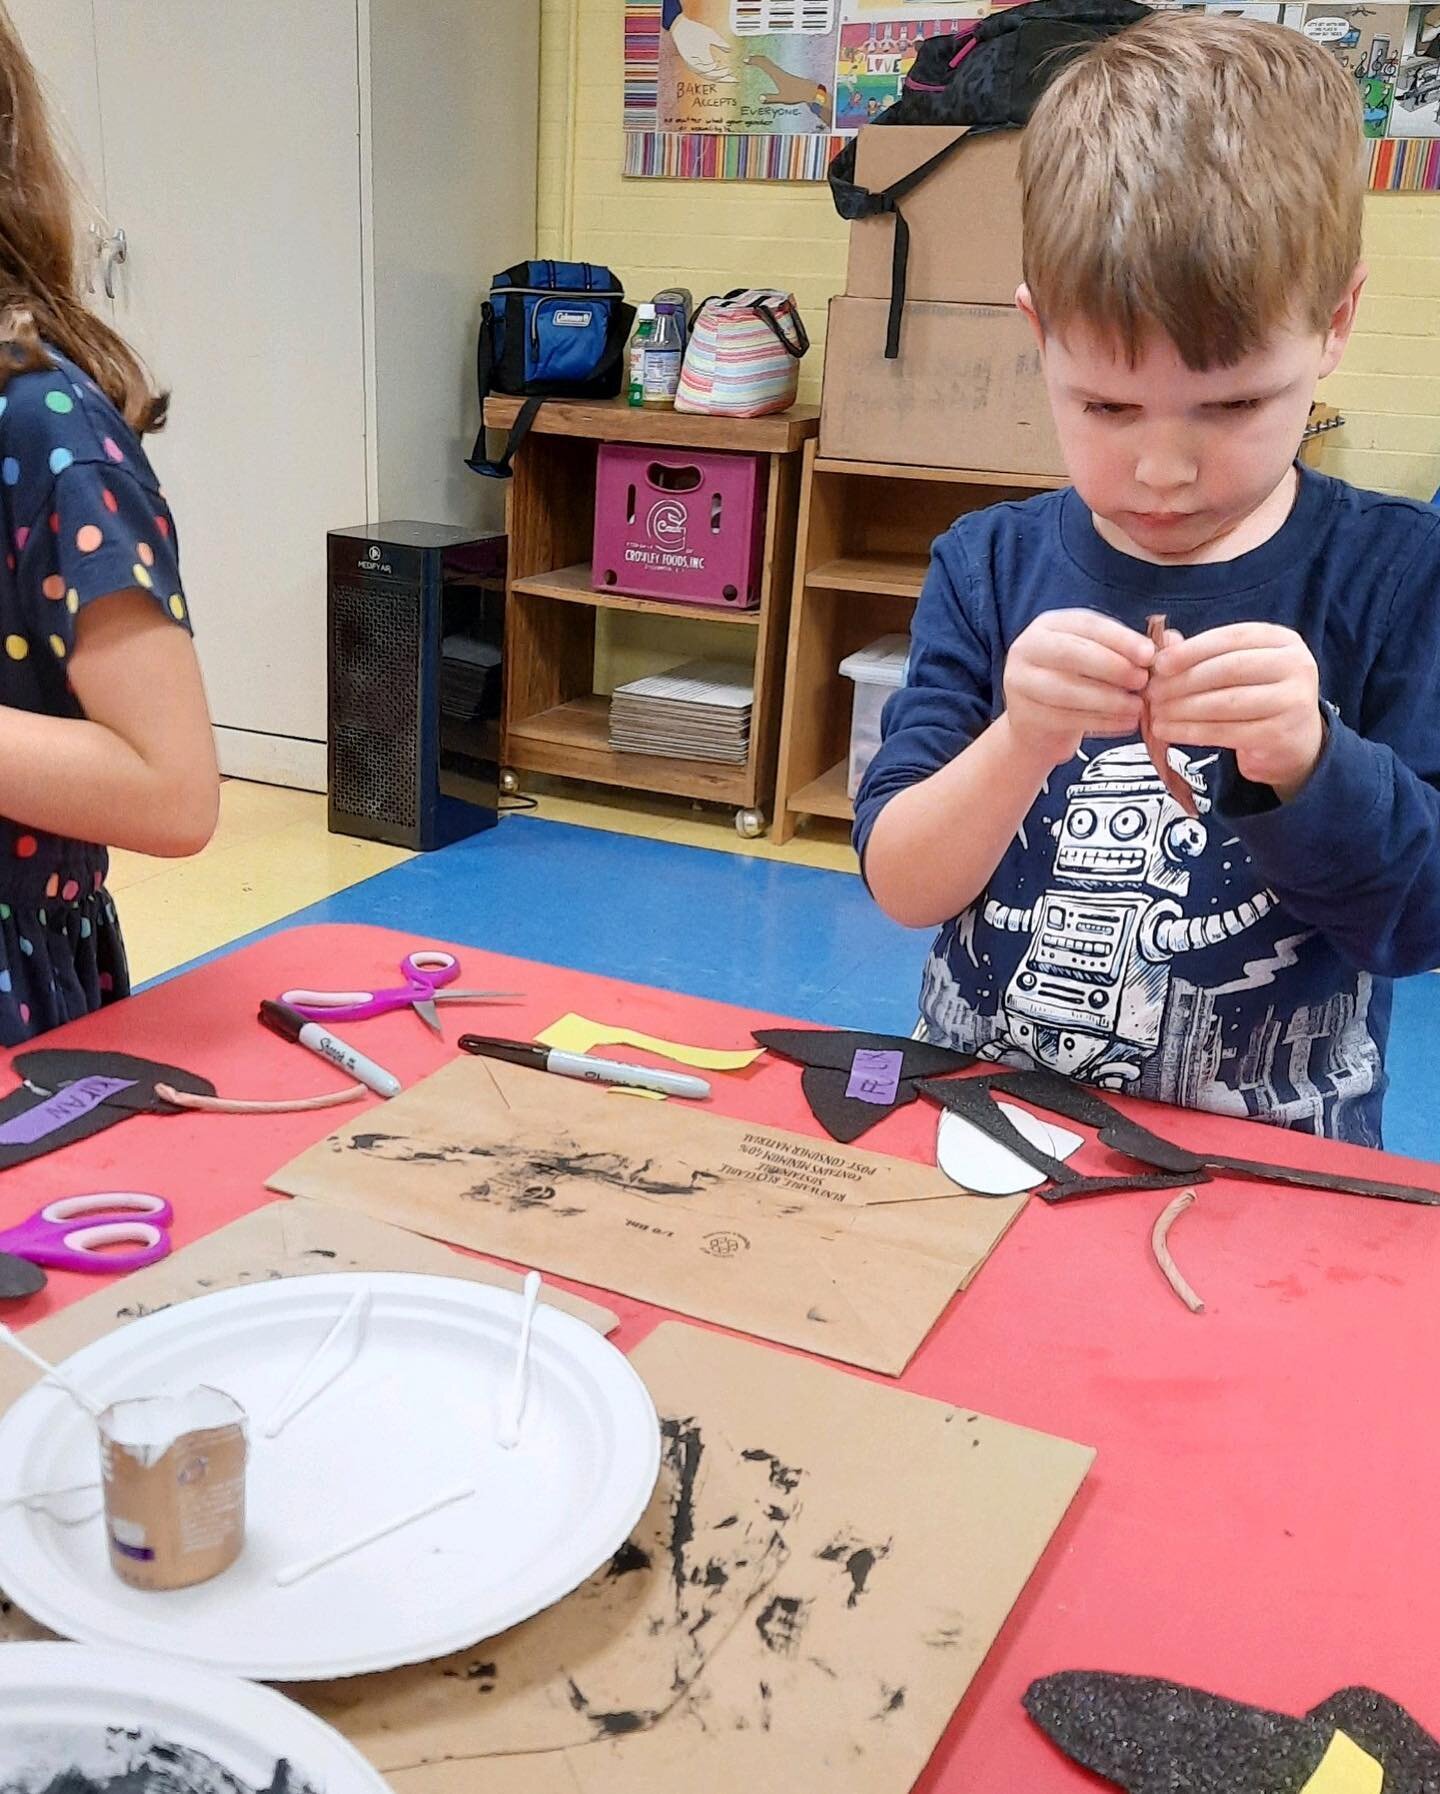 Kindergartner focusing hard on creating decorations for their Halloween bulletin board&hellip;swipe to see the end result!